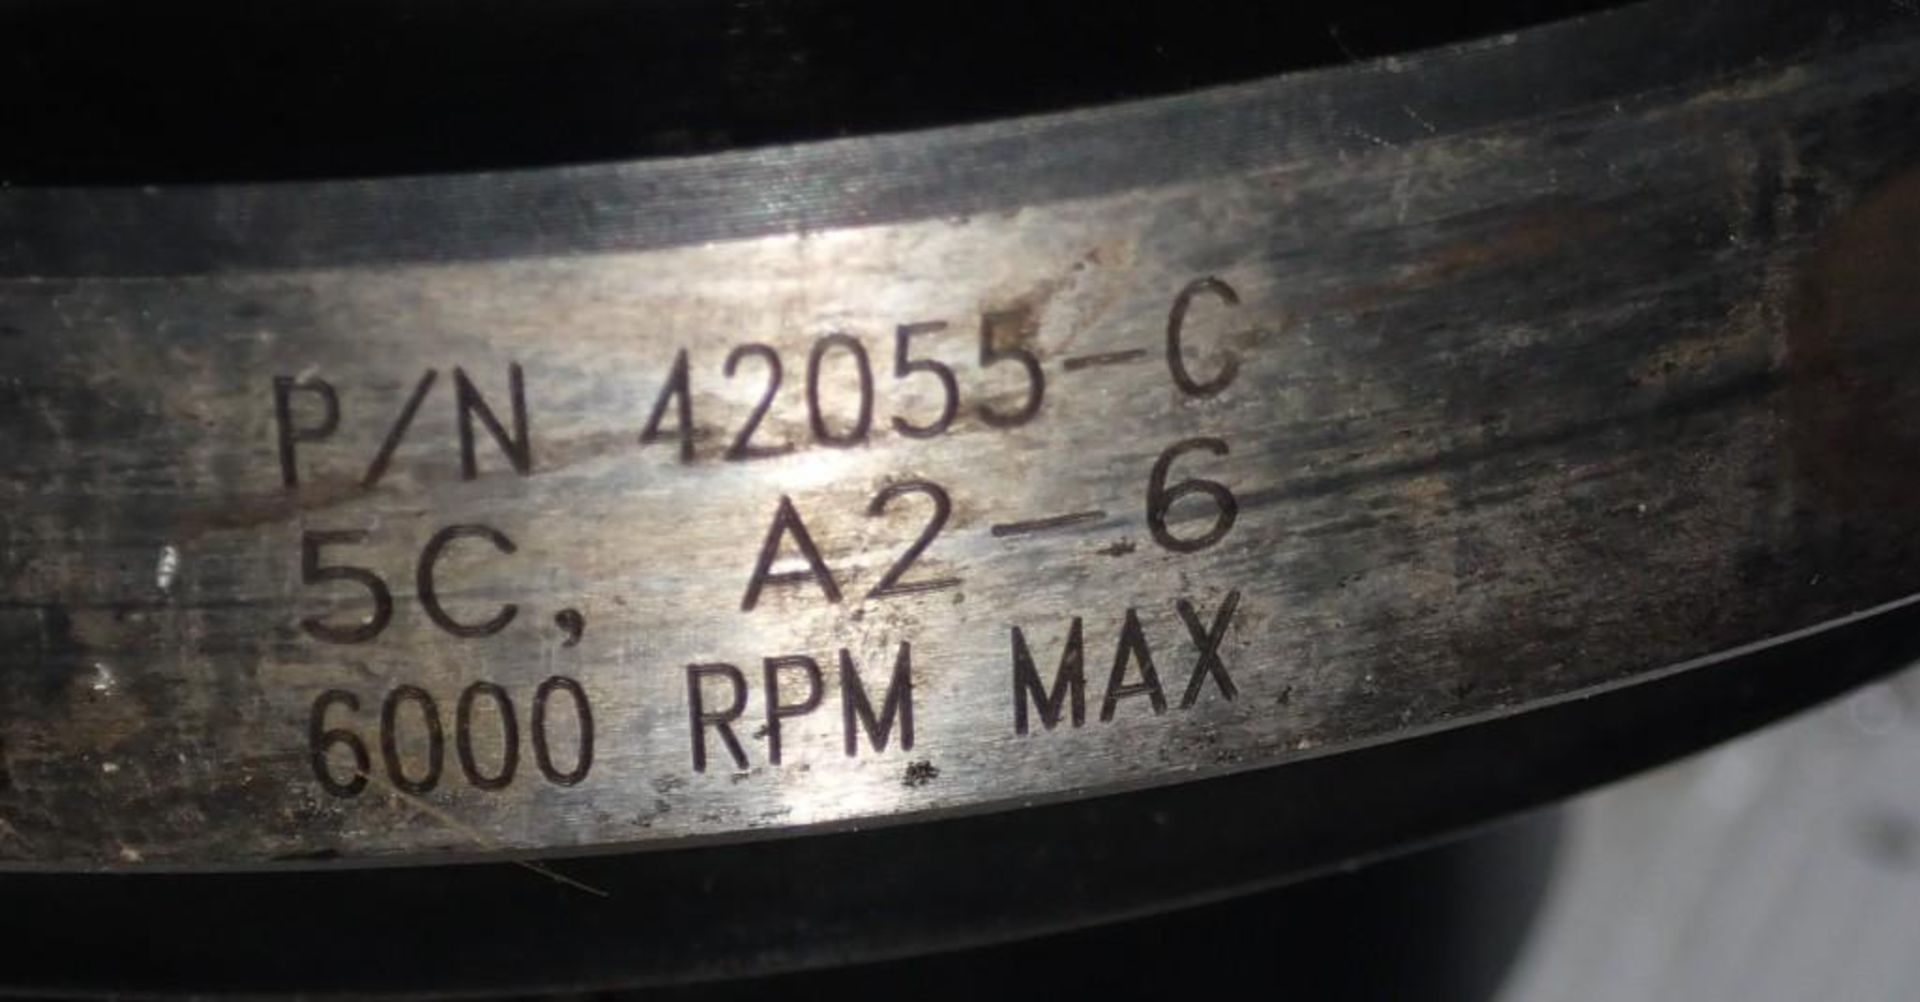 Royal 5C Collet Chuck #42055 - Image 4 of 4